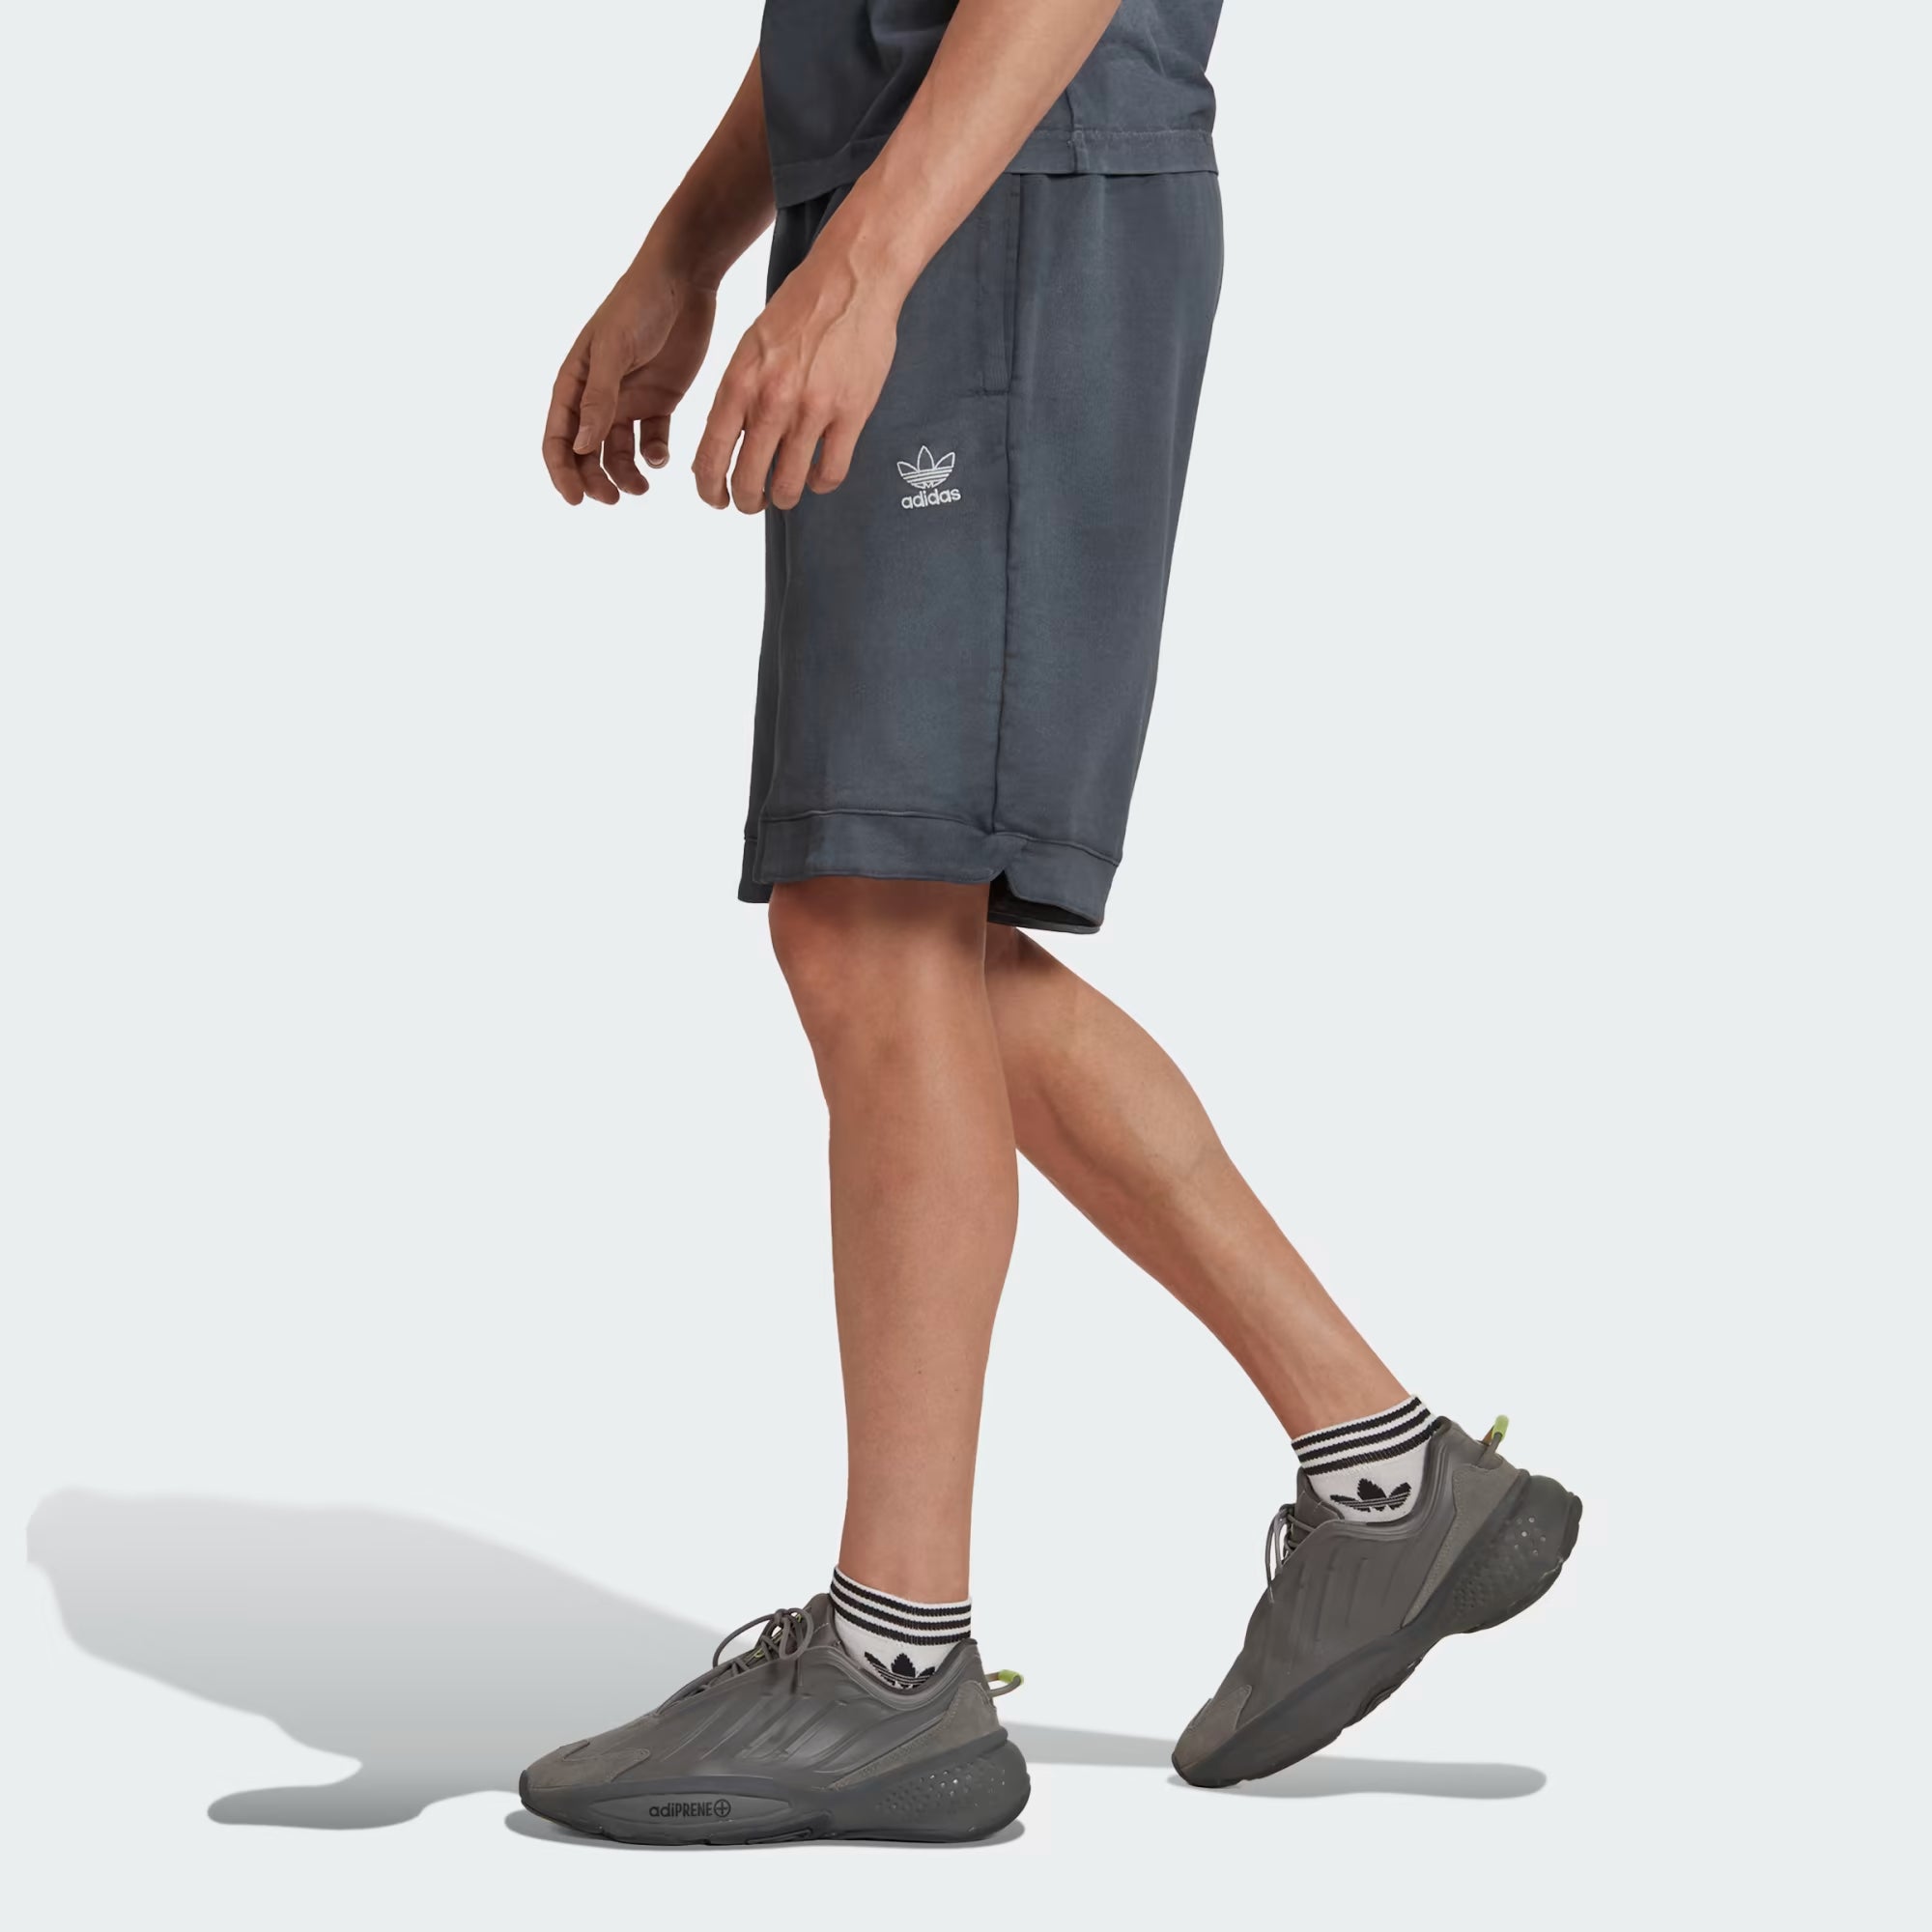 Adidas Essentials+ Made With Nature Shorts - Men